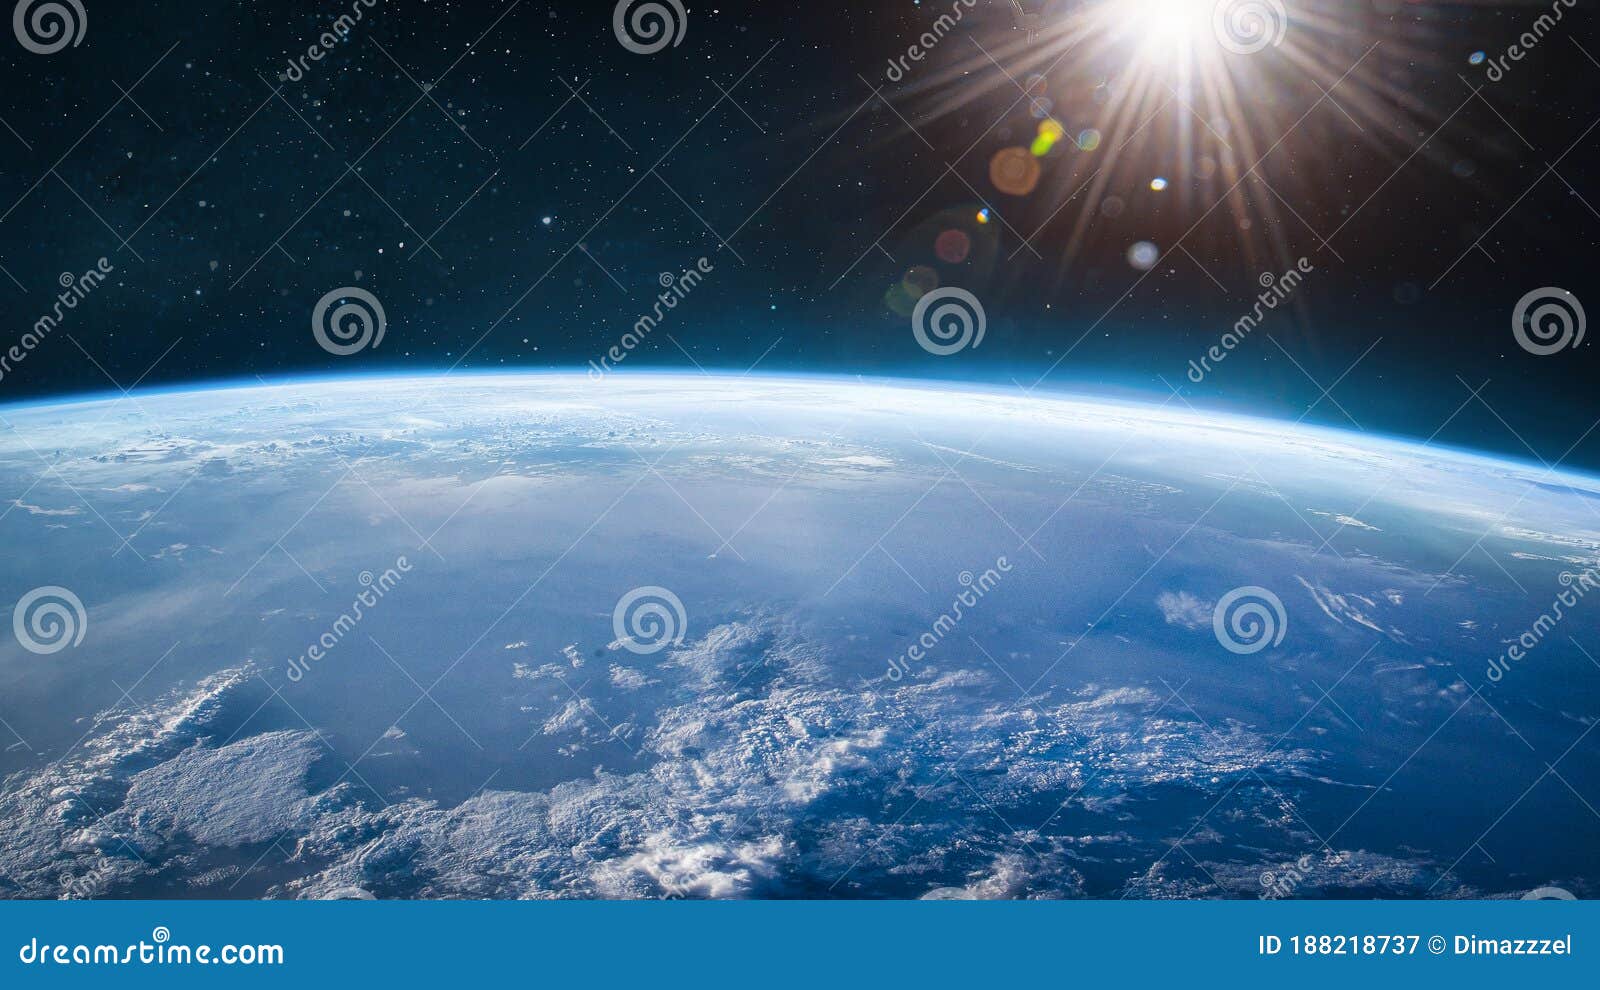 ultra wide wallpaper of earth in the outer space. orbit of planet.